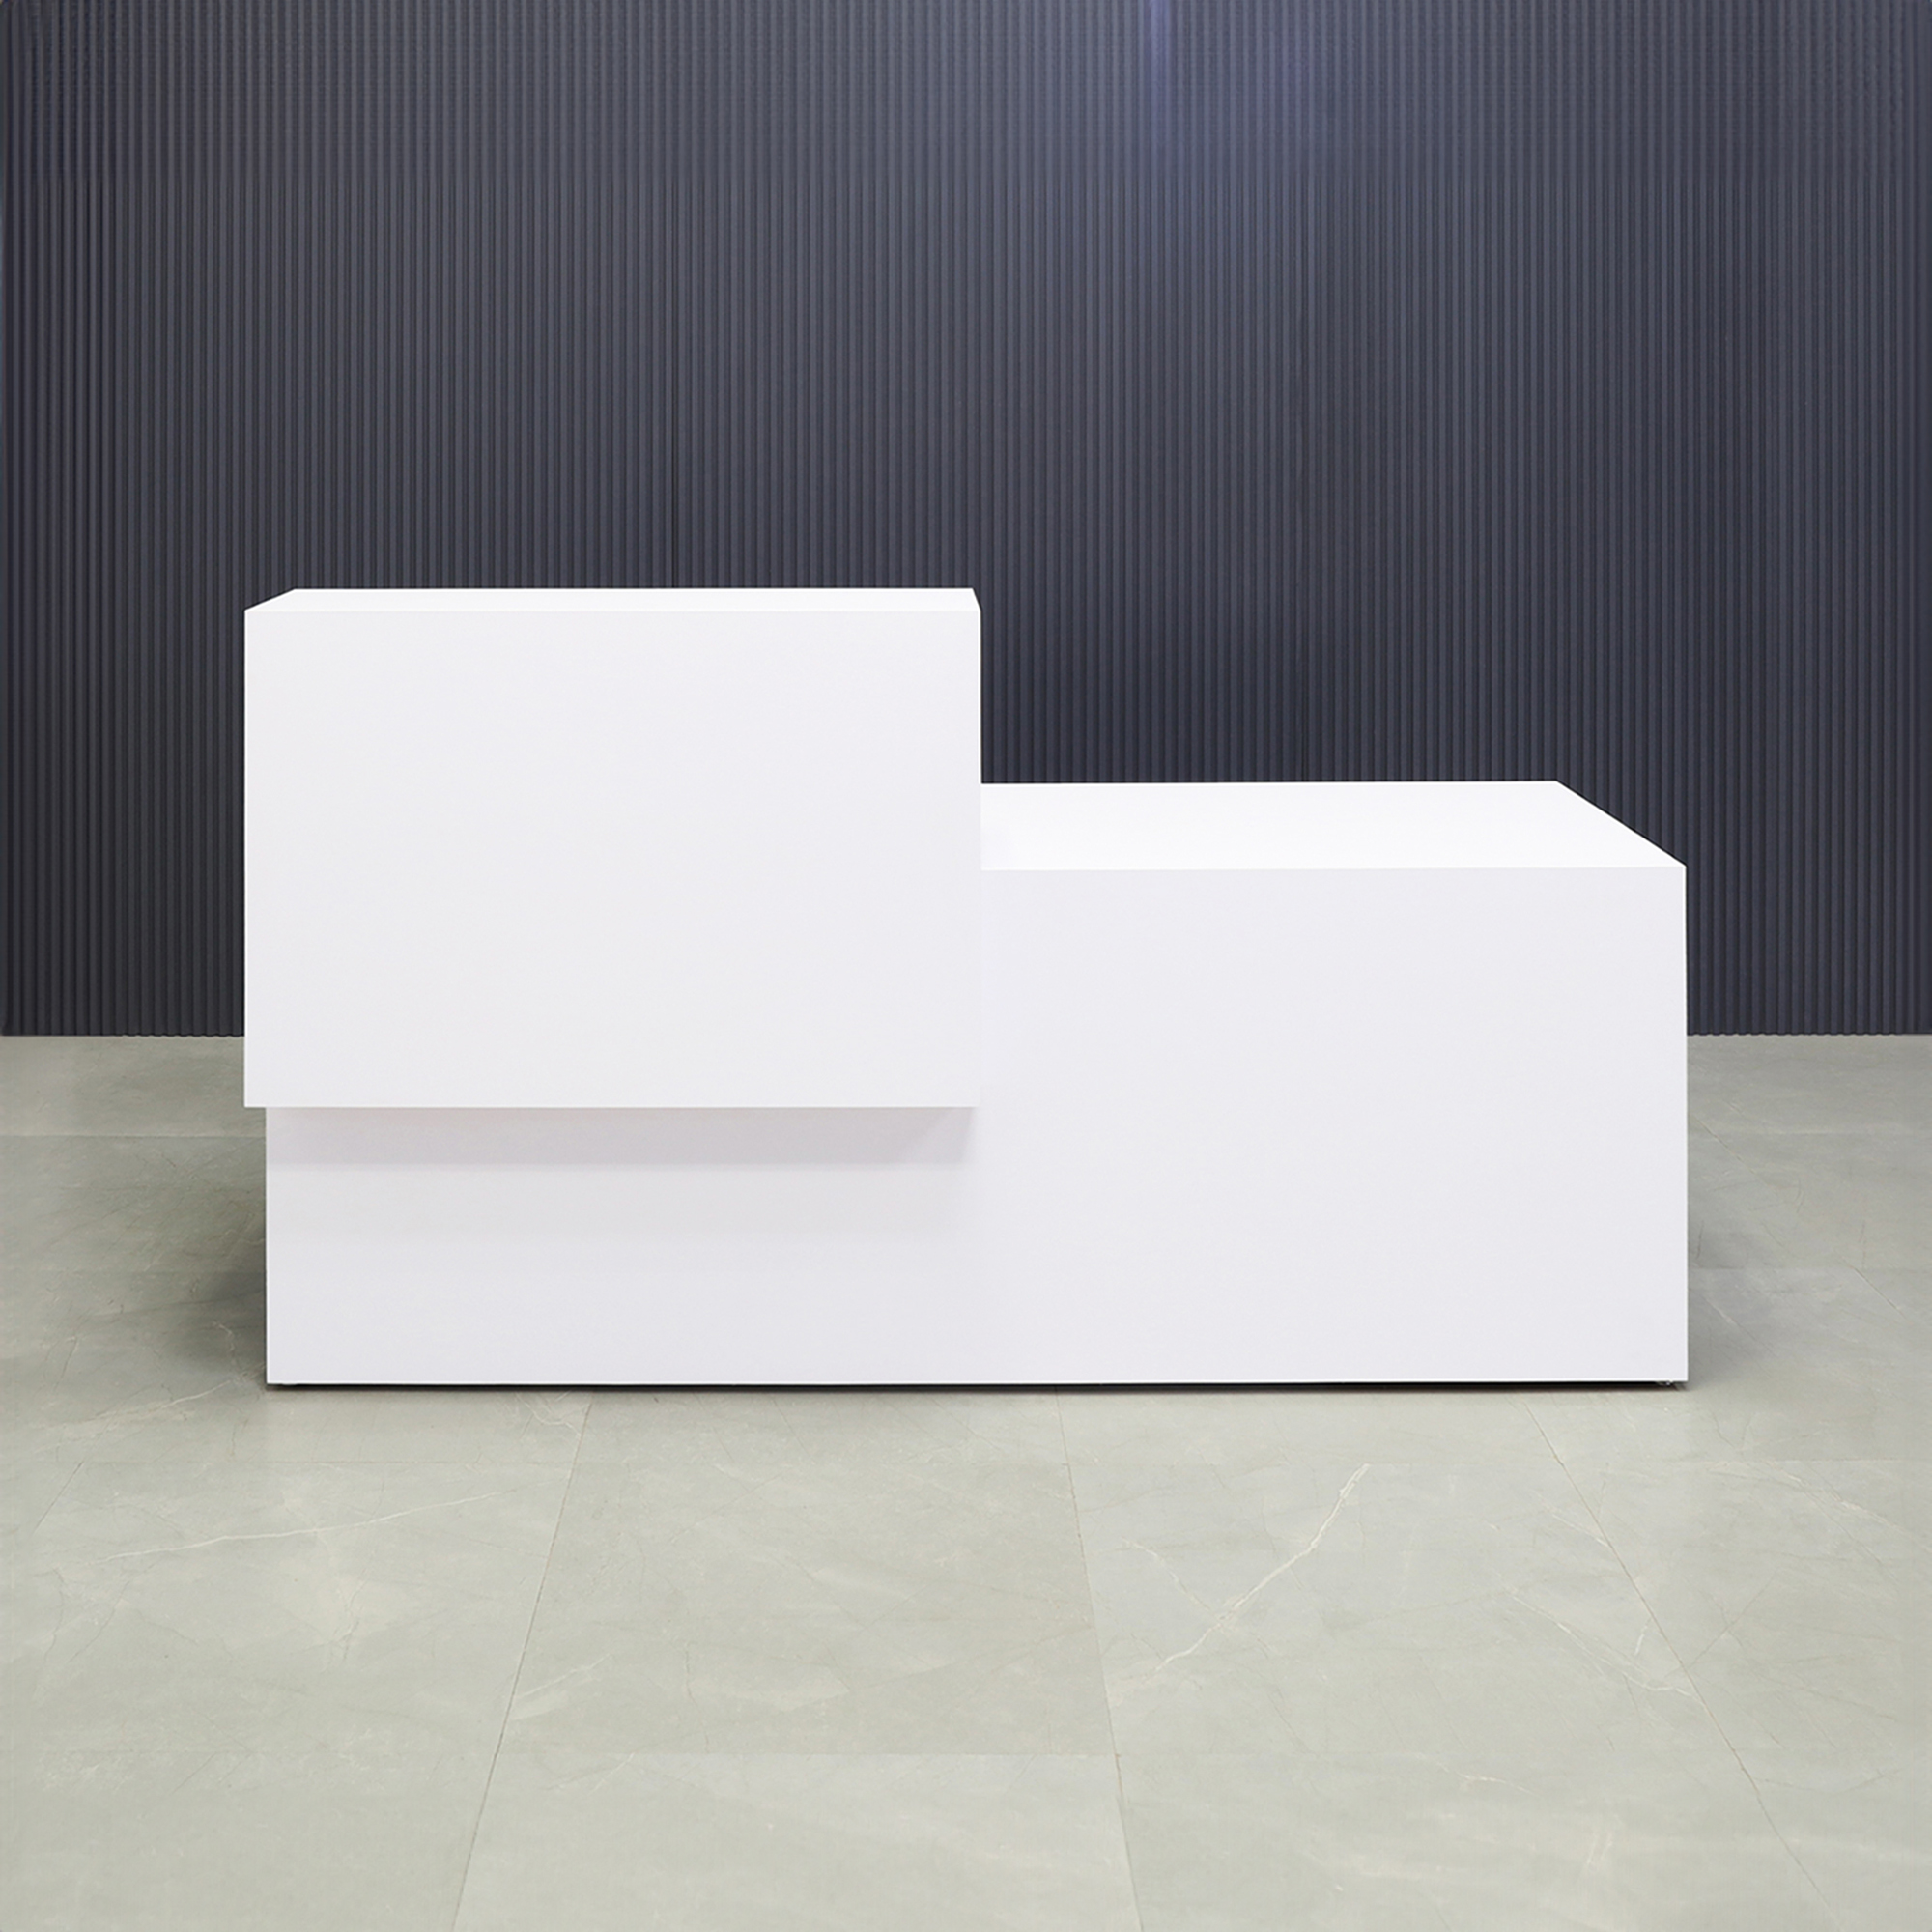 84-inch Los Angeles Reception Desk, left side counter when facing front, in white gloss laminate counter and desk, shown here.